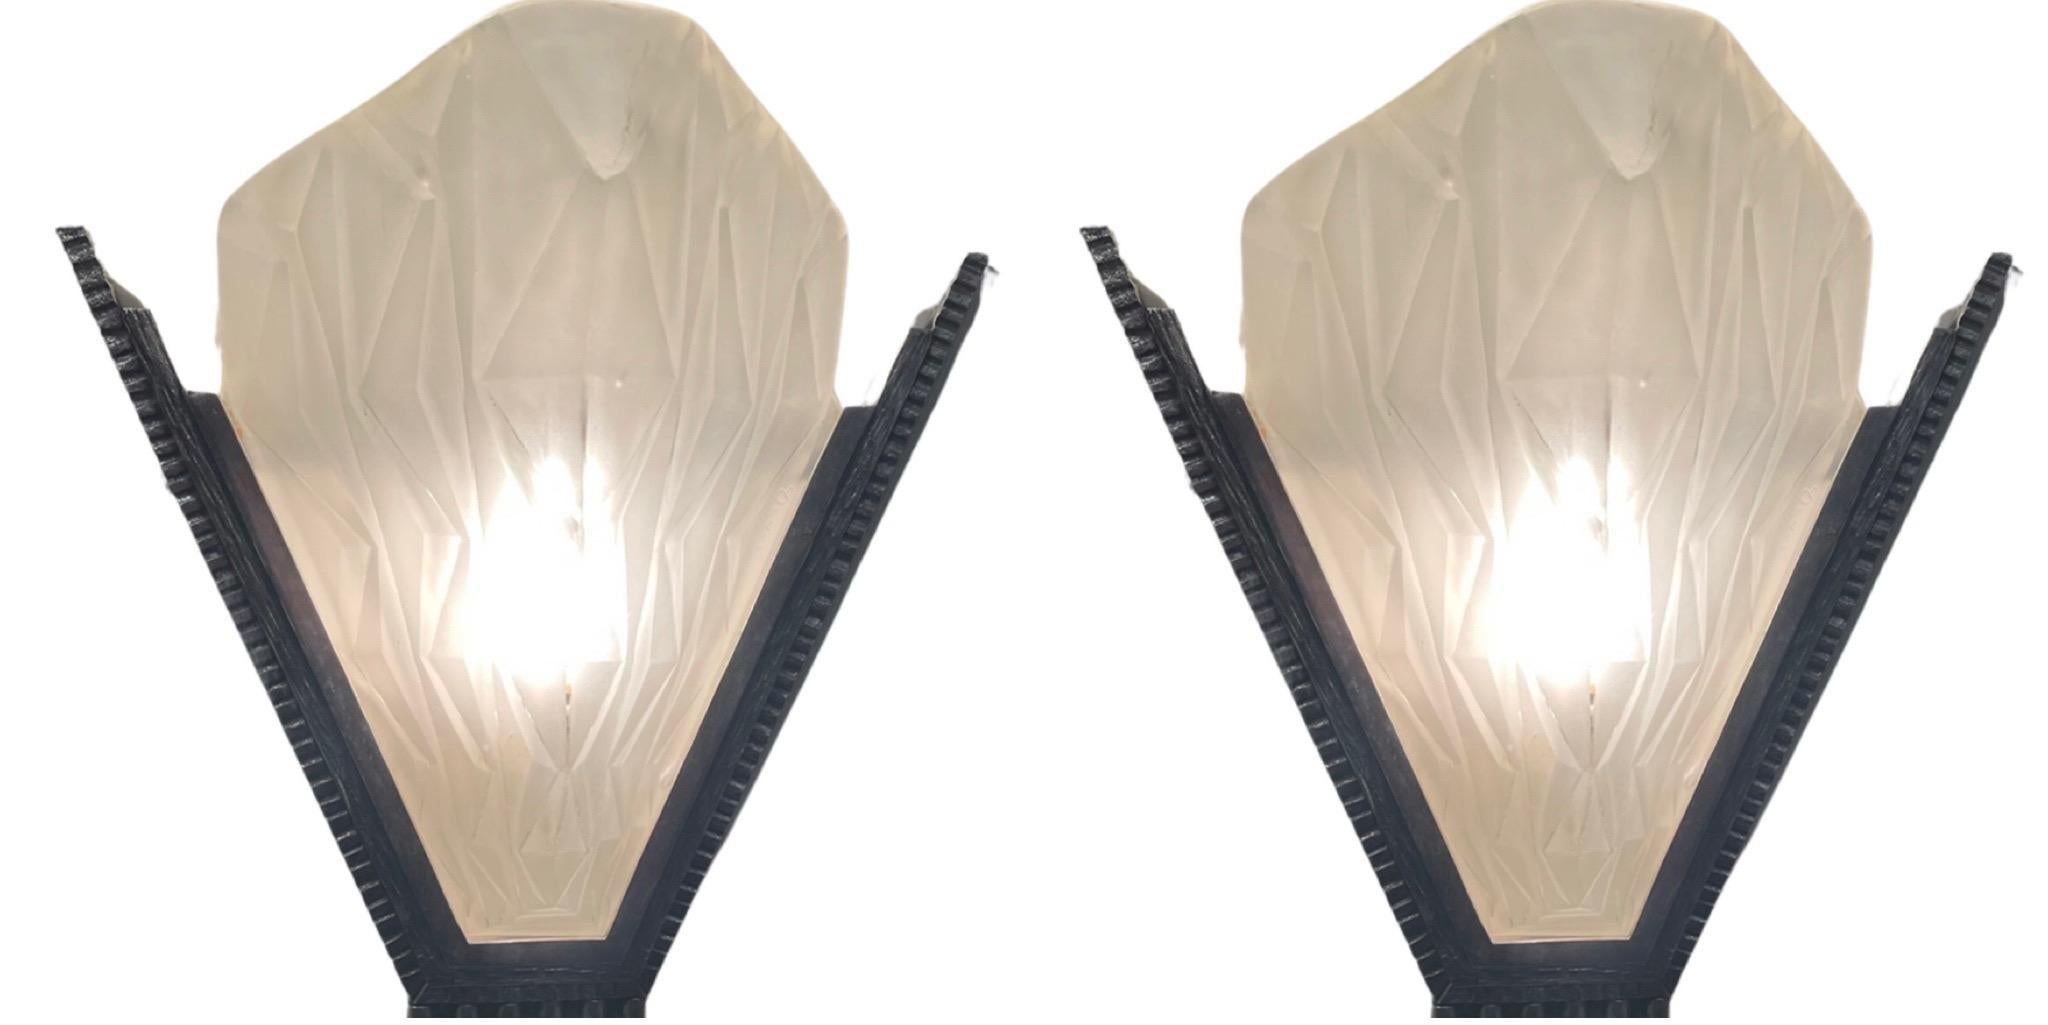 A pair of French Art Deco wall sconces by the French artist ” Degue ” in molded clear frosted glass decorated with geometric motifs. French Degue Art Deco Sconces With Bronze Metal Wall Supports. Geometric design with nice size and heavy nickeled